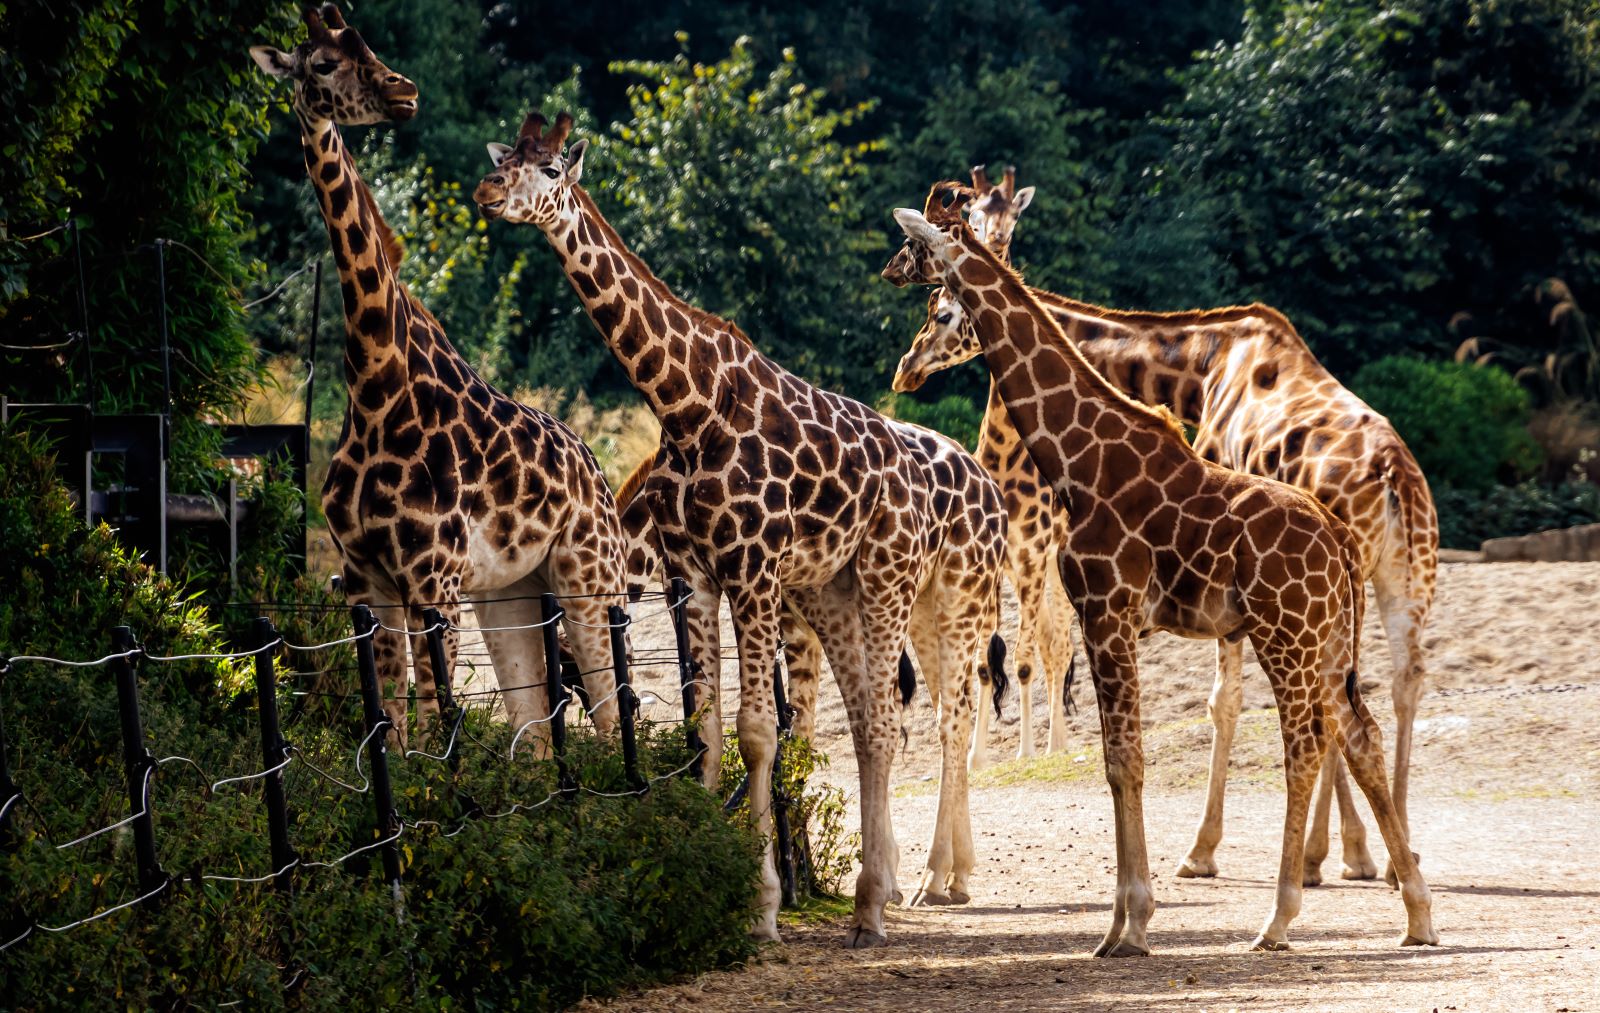 <p class="wp-caption-text">Image credit: Shutterstock / Dawid K Photography</p>  <p>Dublin Zoo in Phoenix Park is one of the oldest and most respected zoos in the world. It’s a fun day out for families or anyone interested in wildlife conservation.</p>